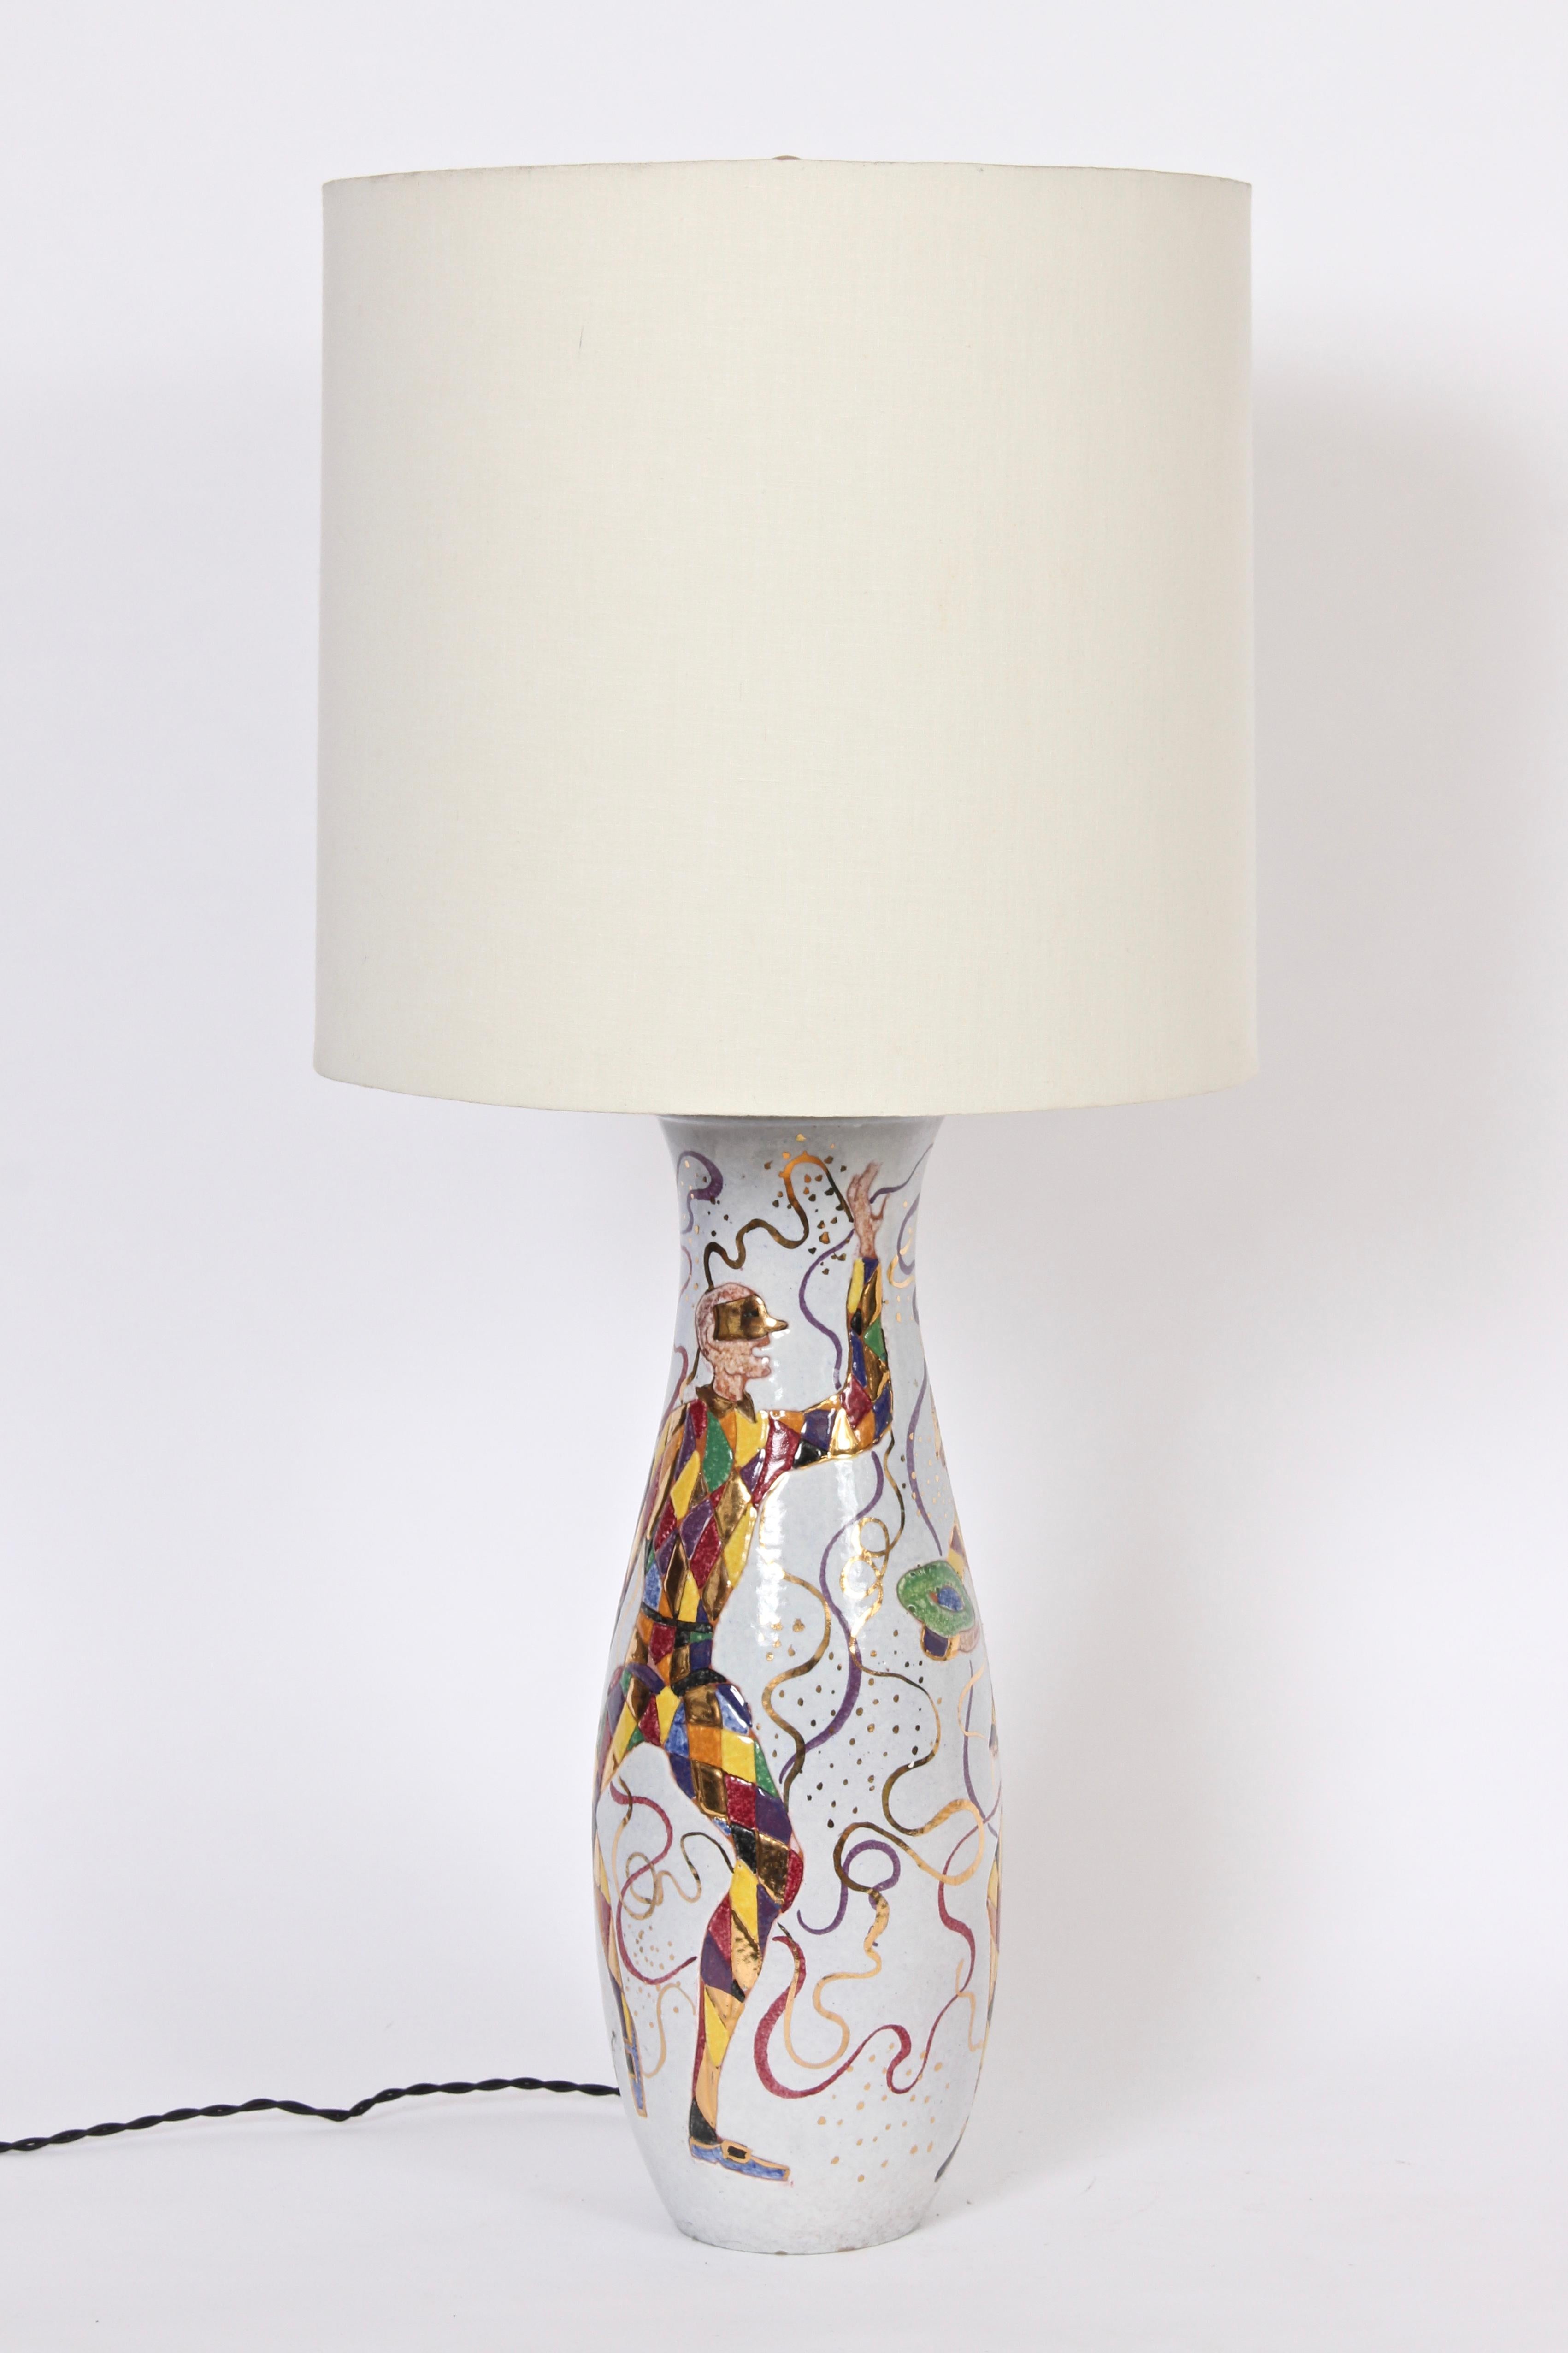 Tall Marcello Fantoni Festive Hand Painted White Pottery Table Lamp  For Sale 2